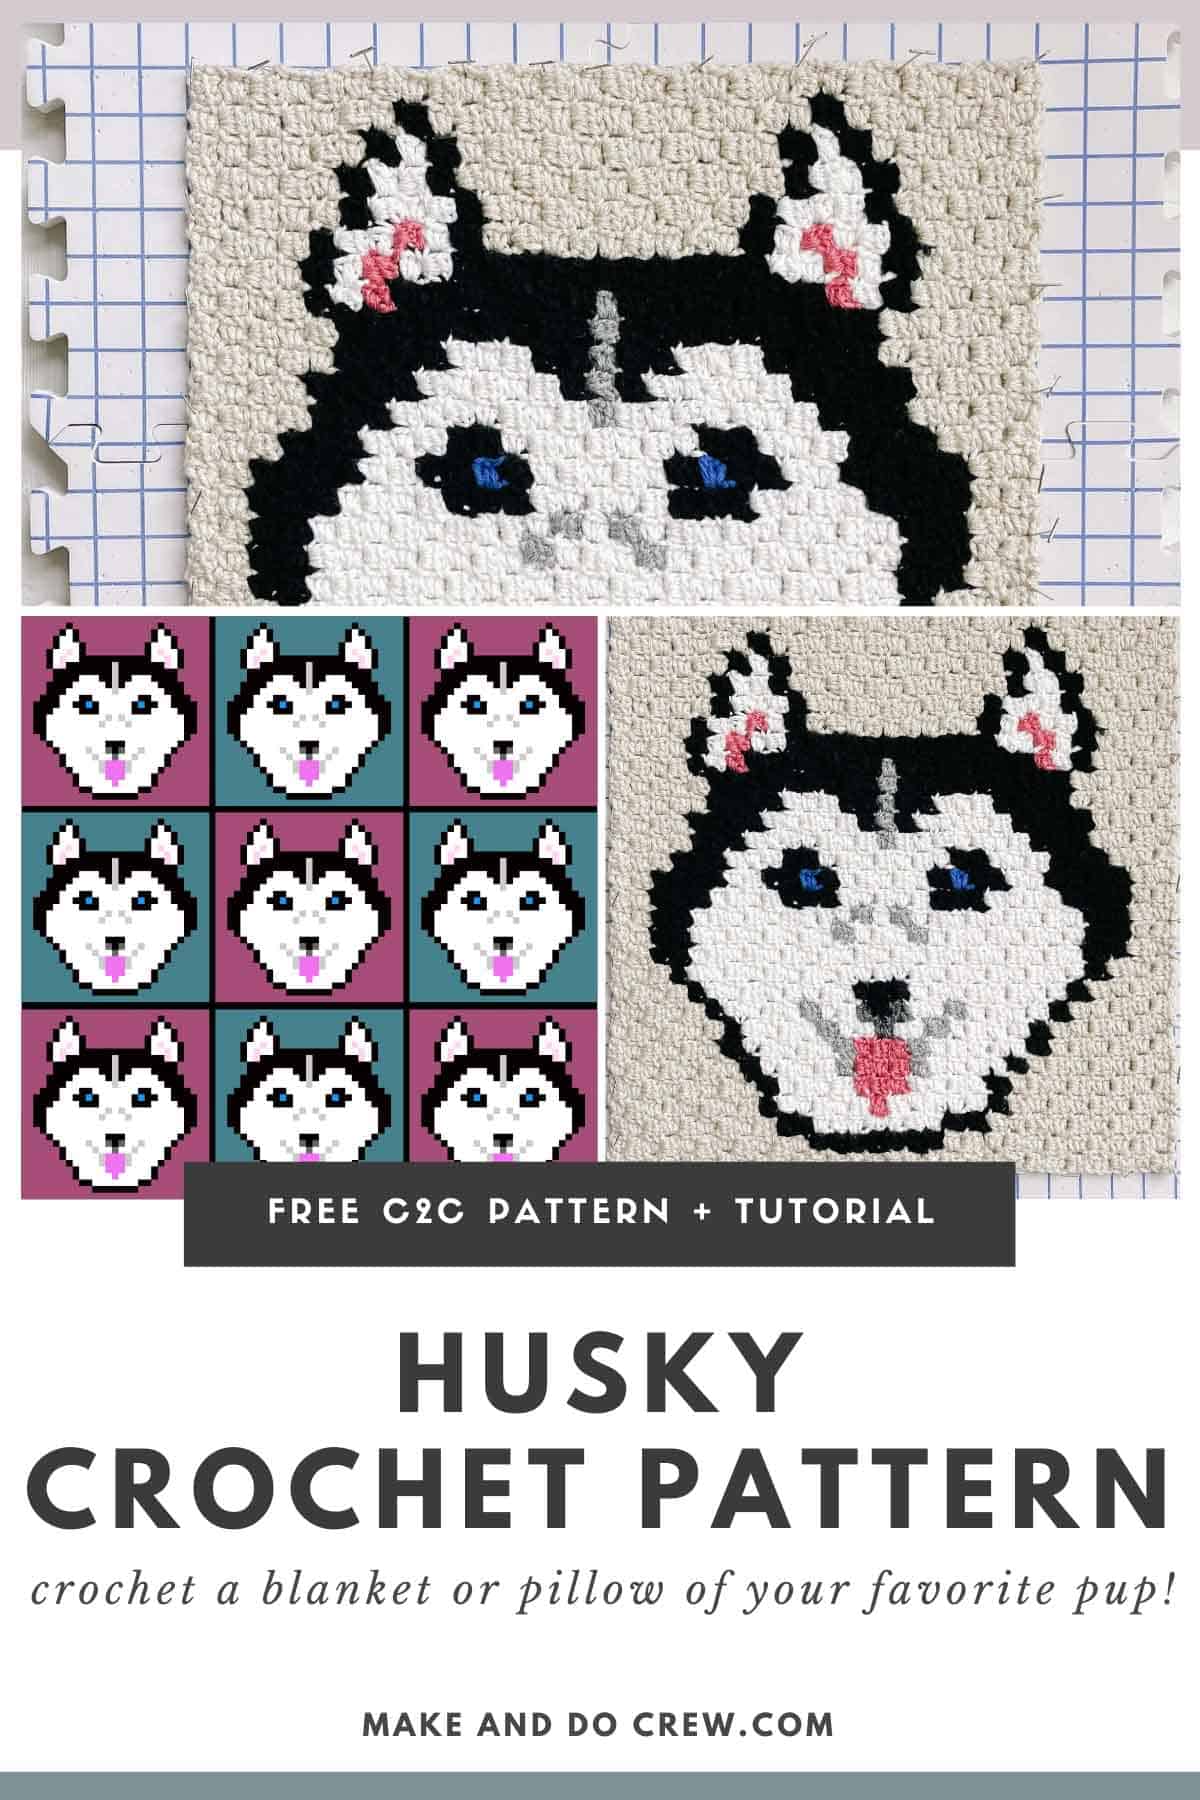 This image shows a free crochet pattern for a corner to corner crochet square featuring a black and white Husky dog face. These photos include a front image of the crochet square on a blocking board, a close up image of the dog square, and a pixilated version of the dog square repeating nine times.